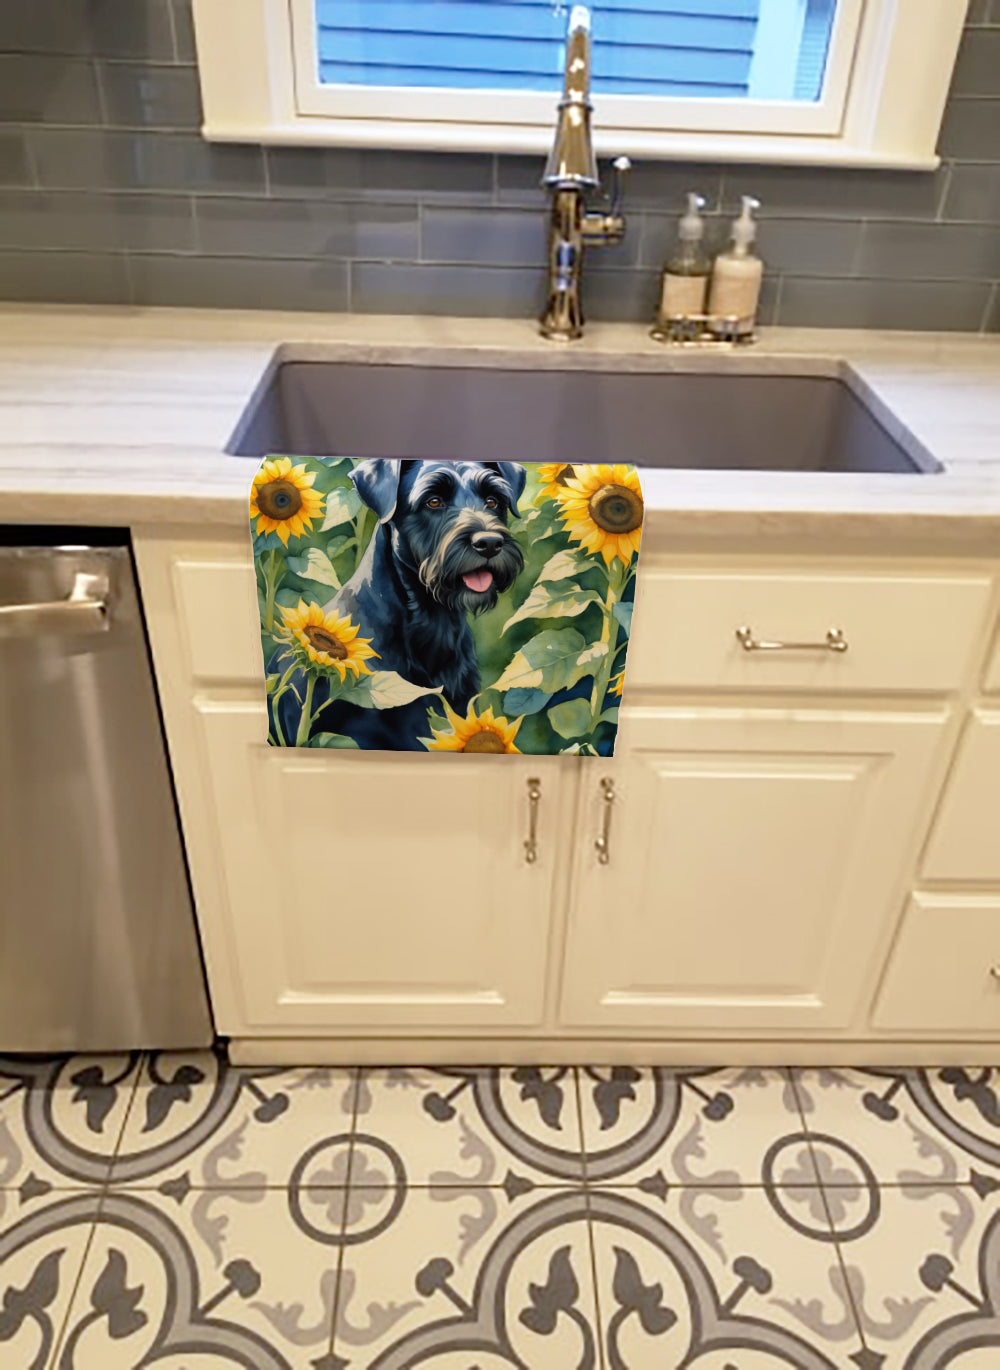 Buy this Giant Schnauzer in Sunflowers Kitchen Towel